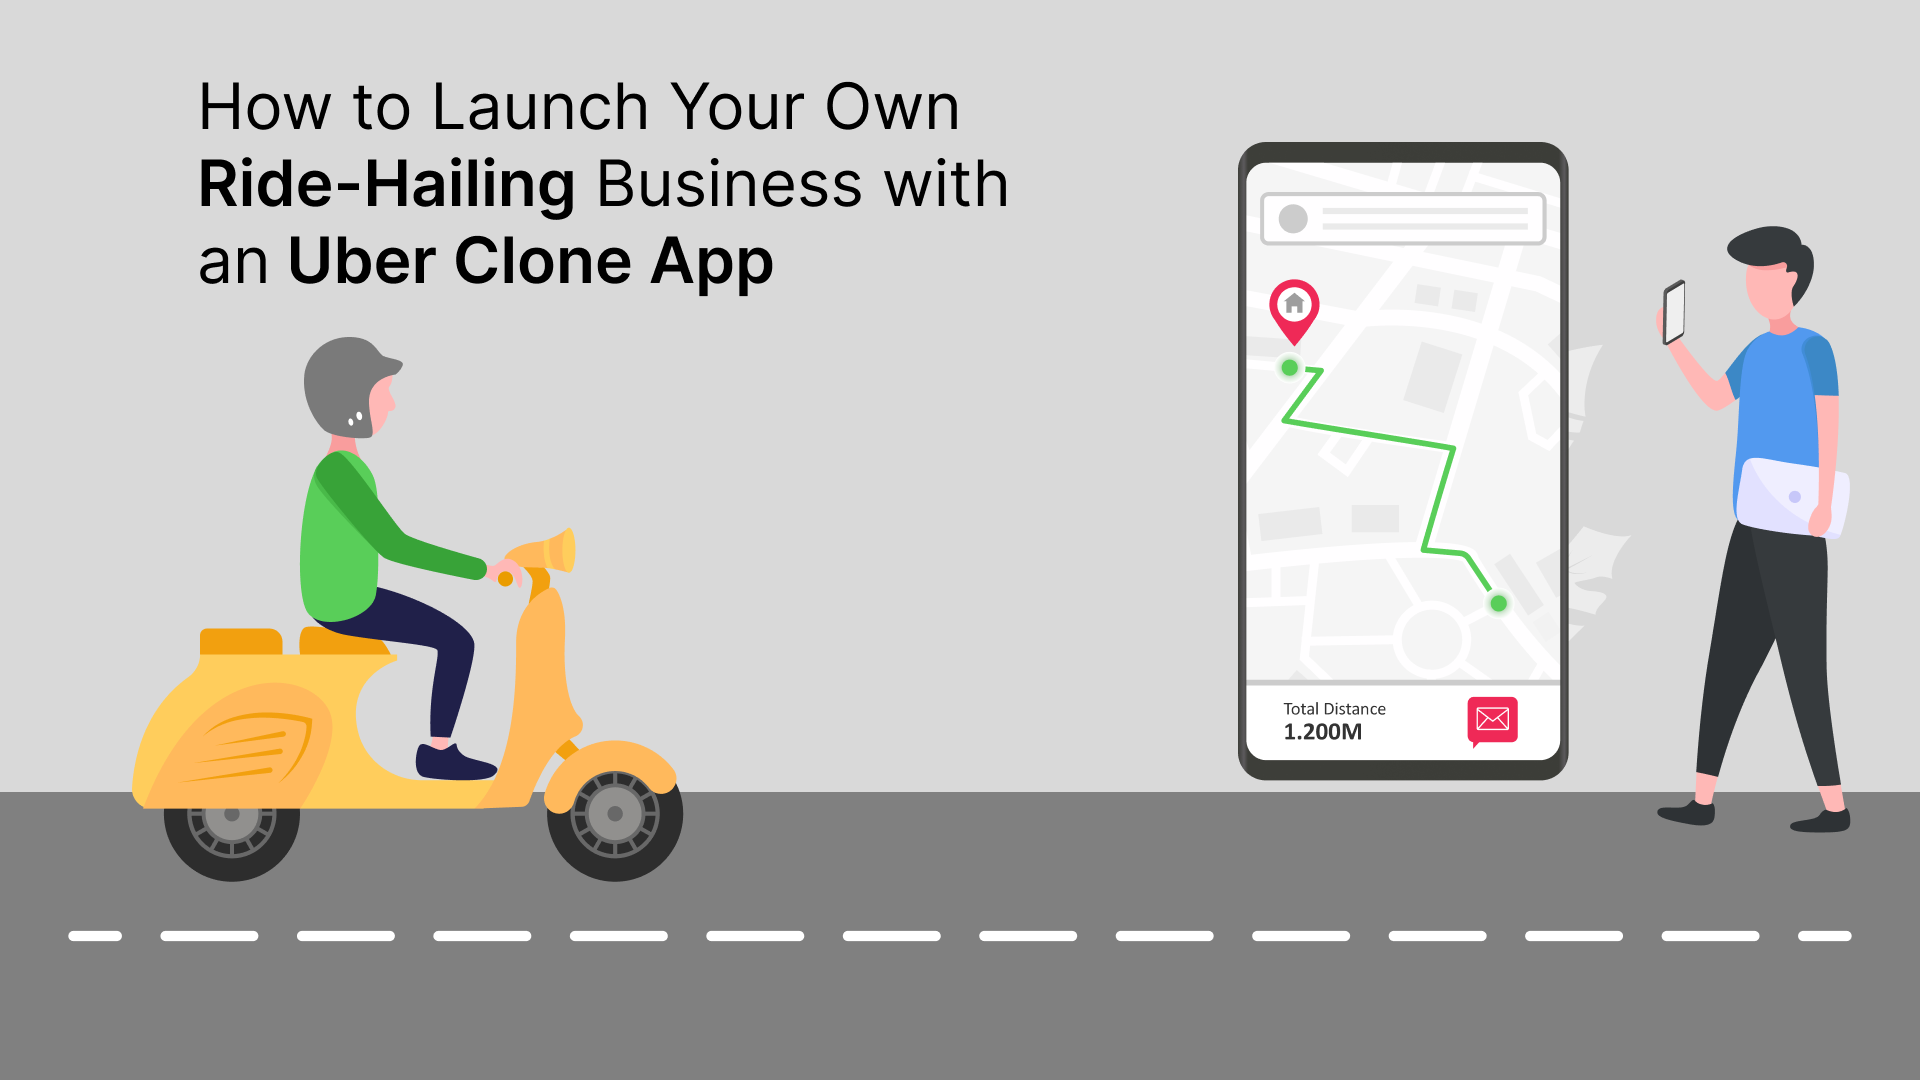 How to Launch Your Own
Ride-Hailing Business with
an Uber Clone App

¢